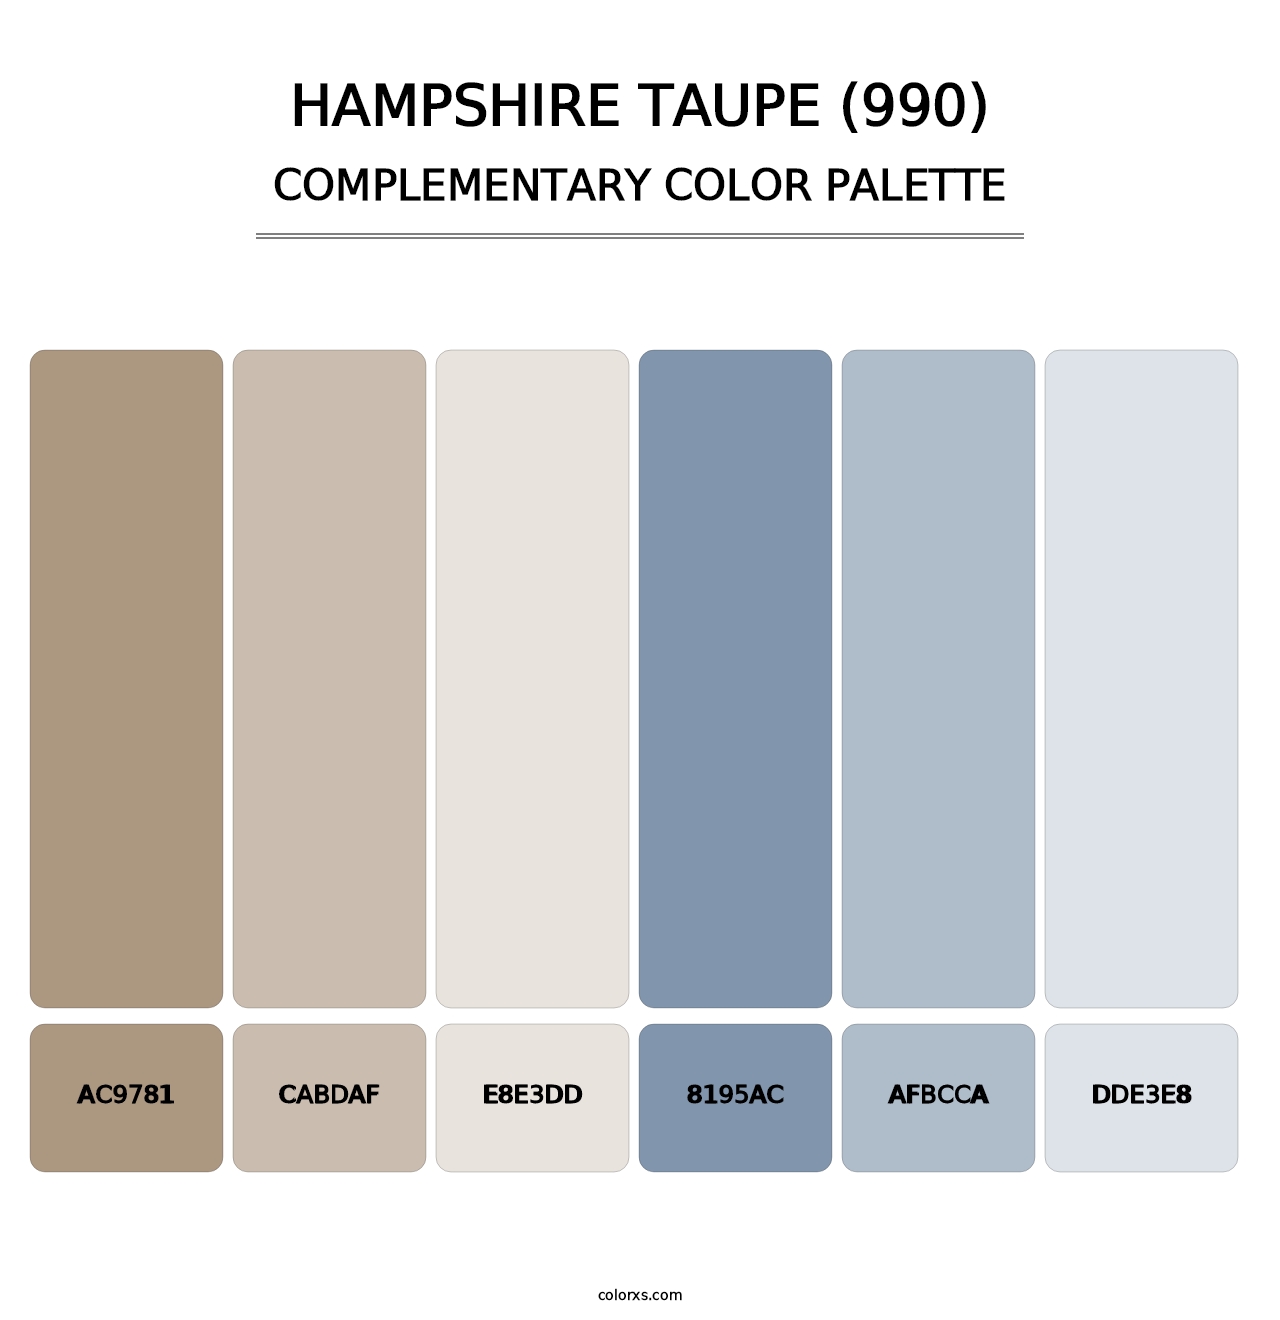 Hampshire Taupe (990) - Complementary Color Palette